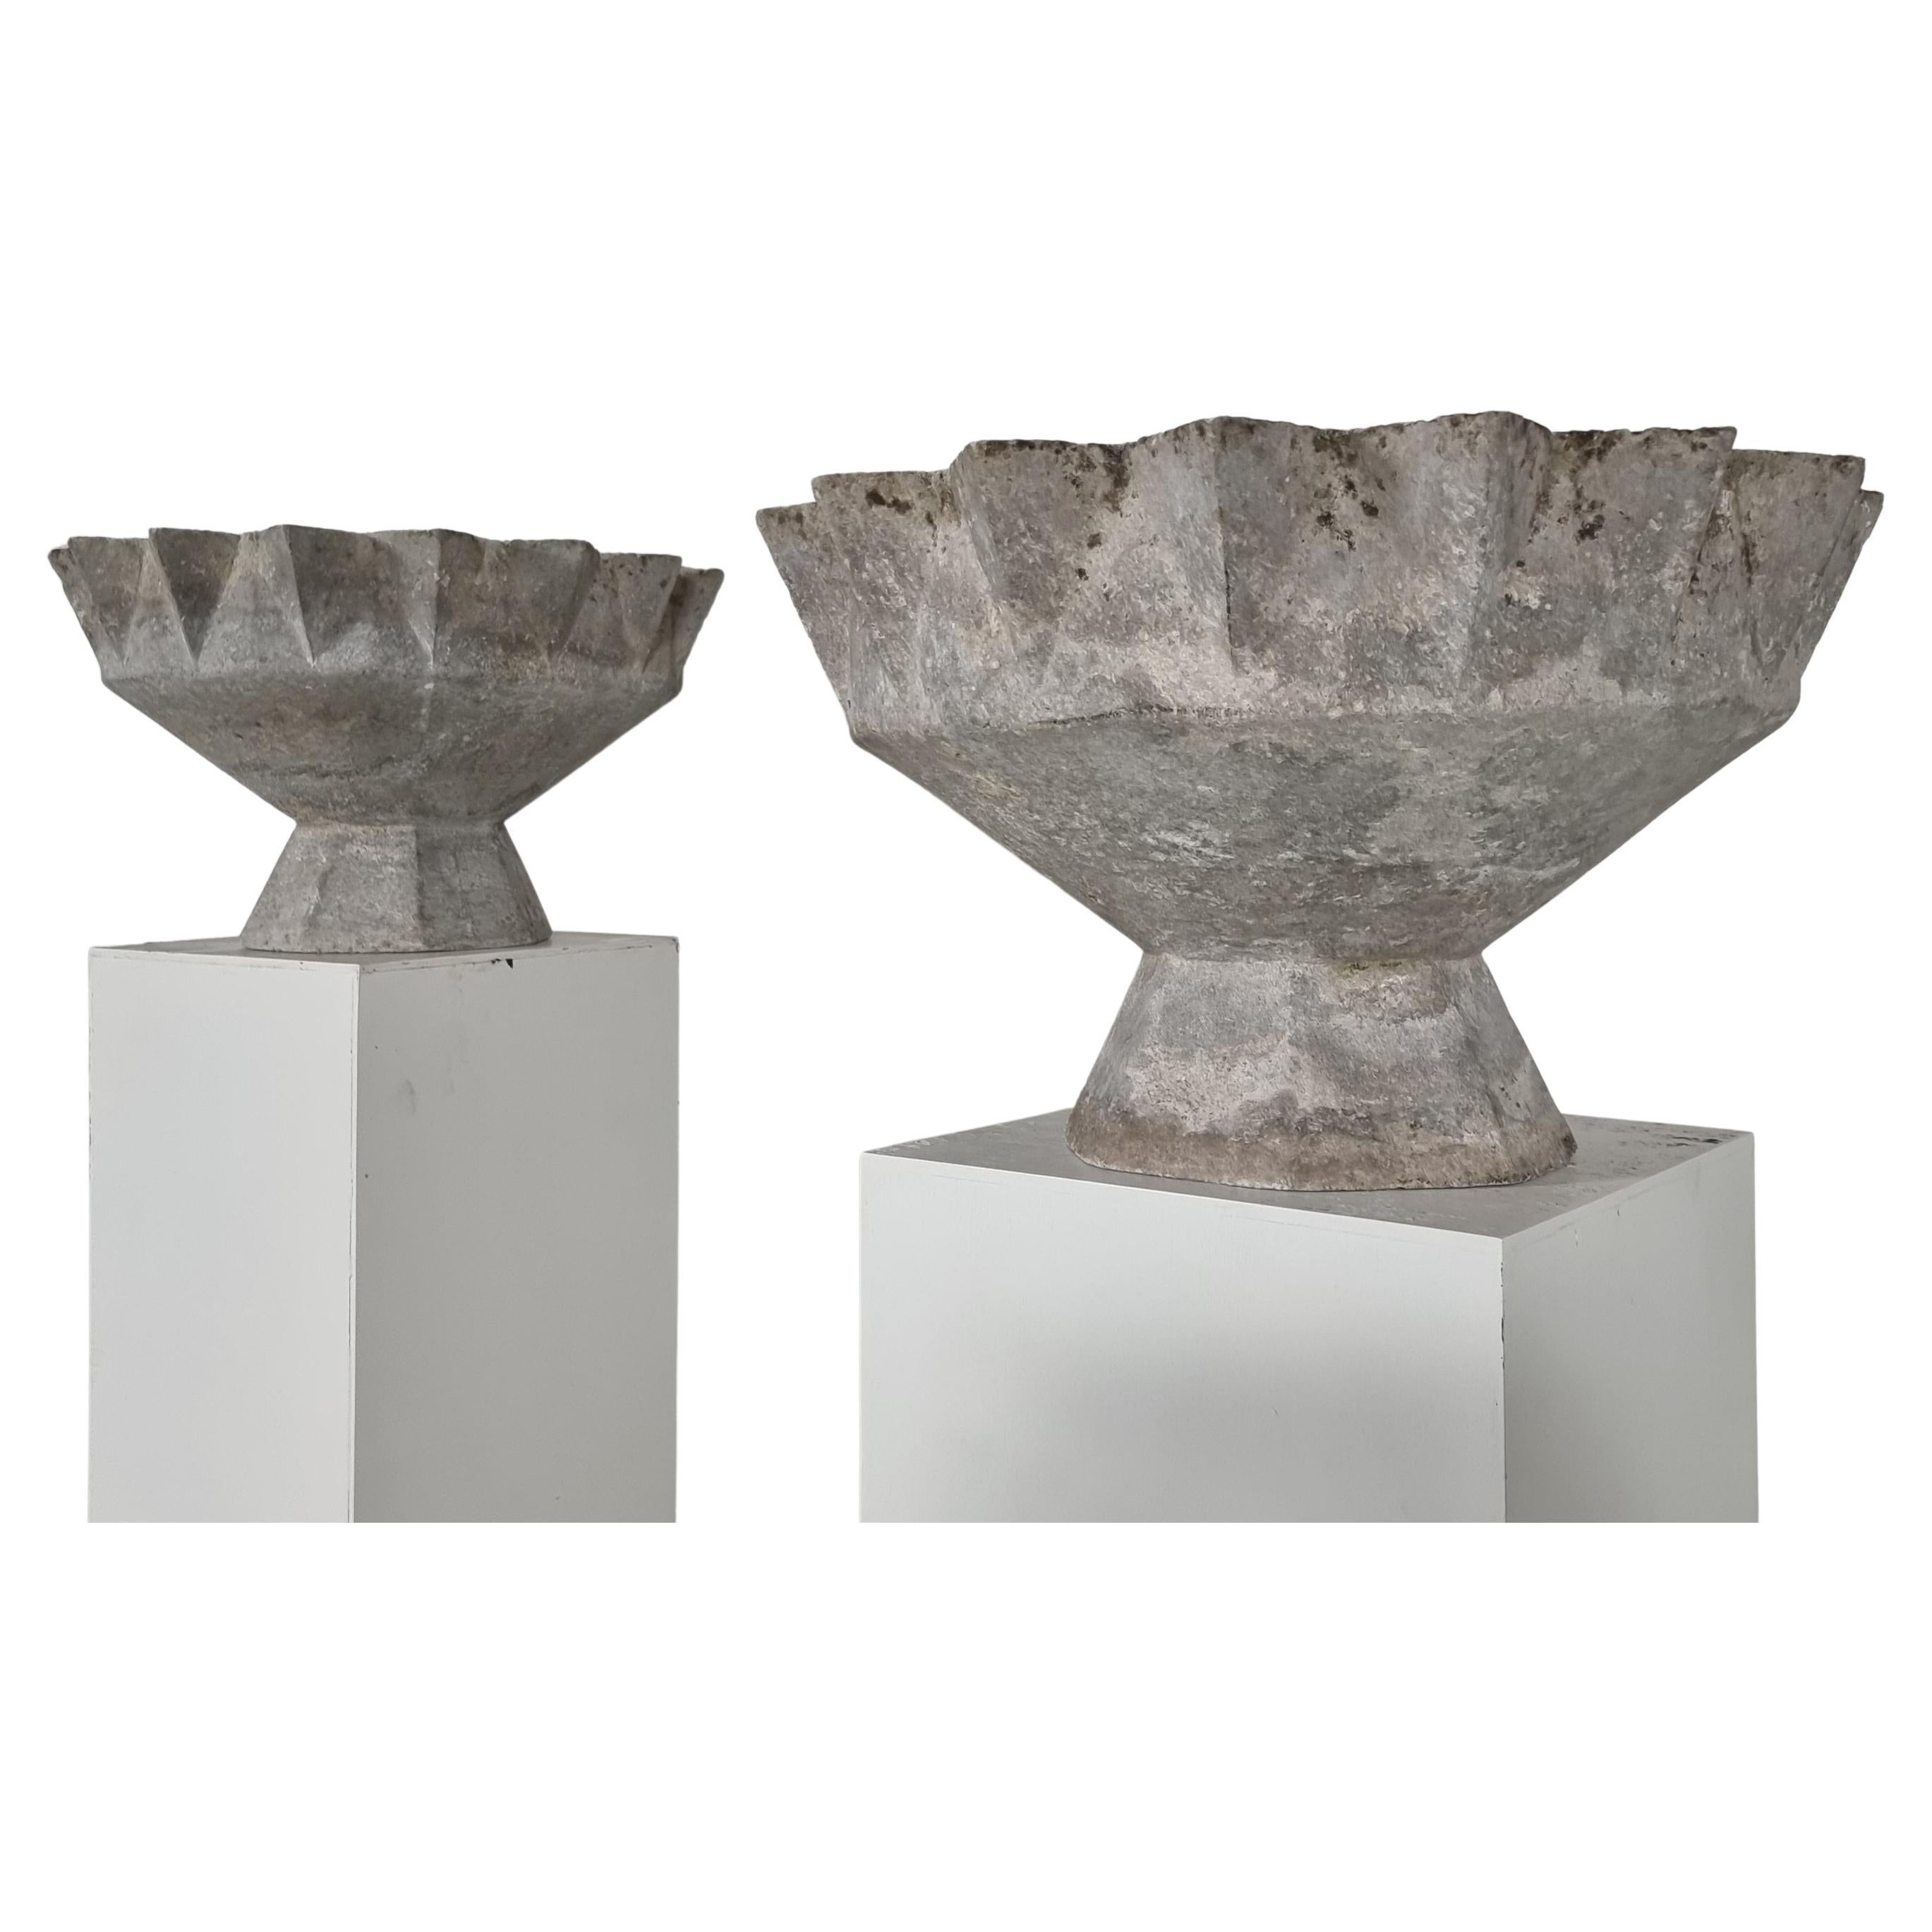 Set of 2 Chalice shaped planters by Willy Guhl, 1970s For Sale at 1stDibs